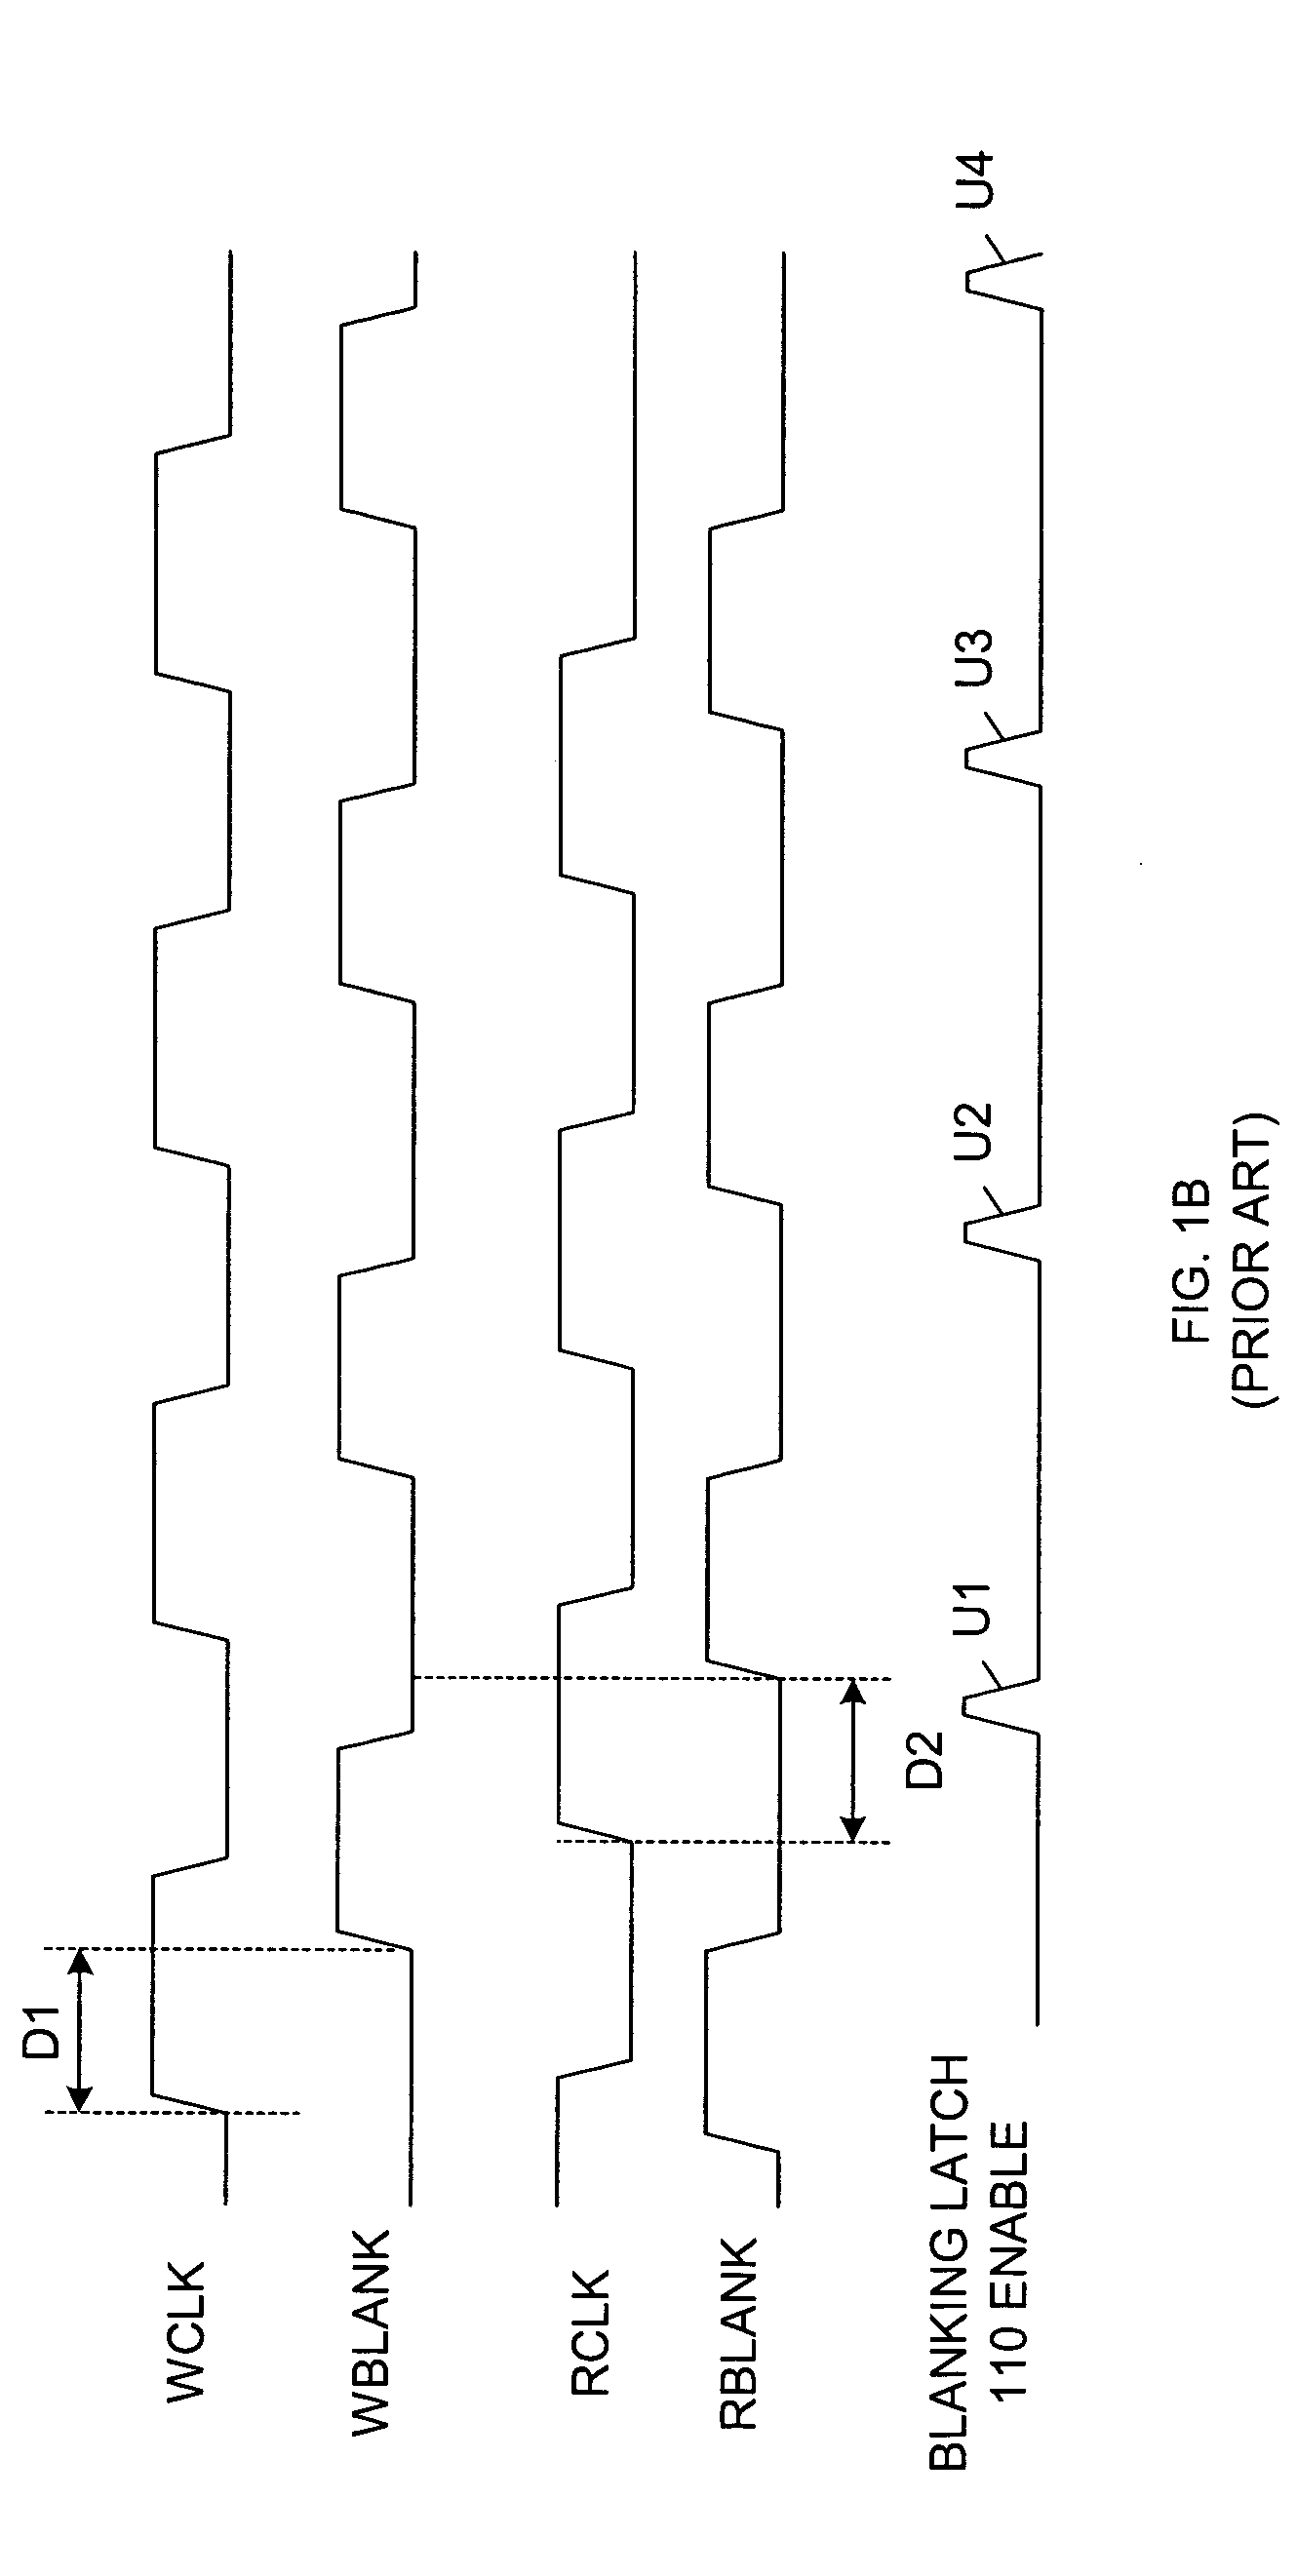 Self-timed multiple blanking for noise suppression during flag generation in a multi-queue first-in first-out memory system